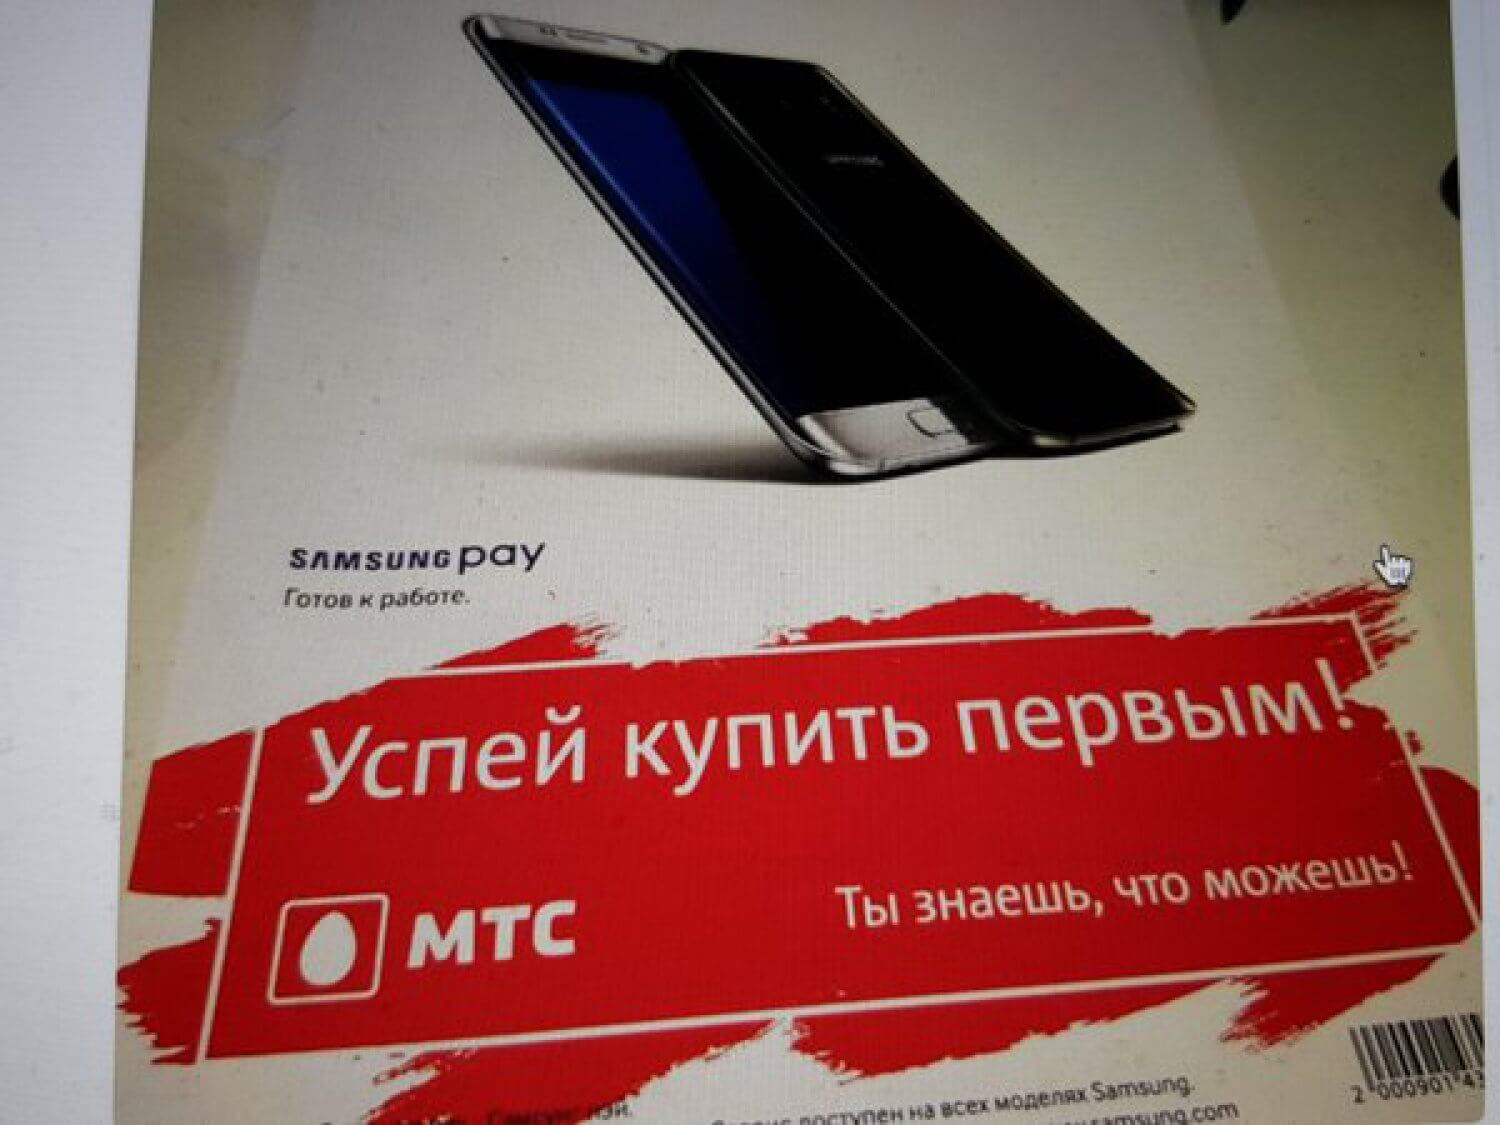 mts-russia-galaxy-s7-samsung-pay